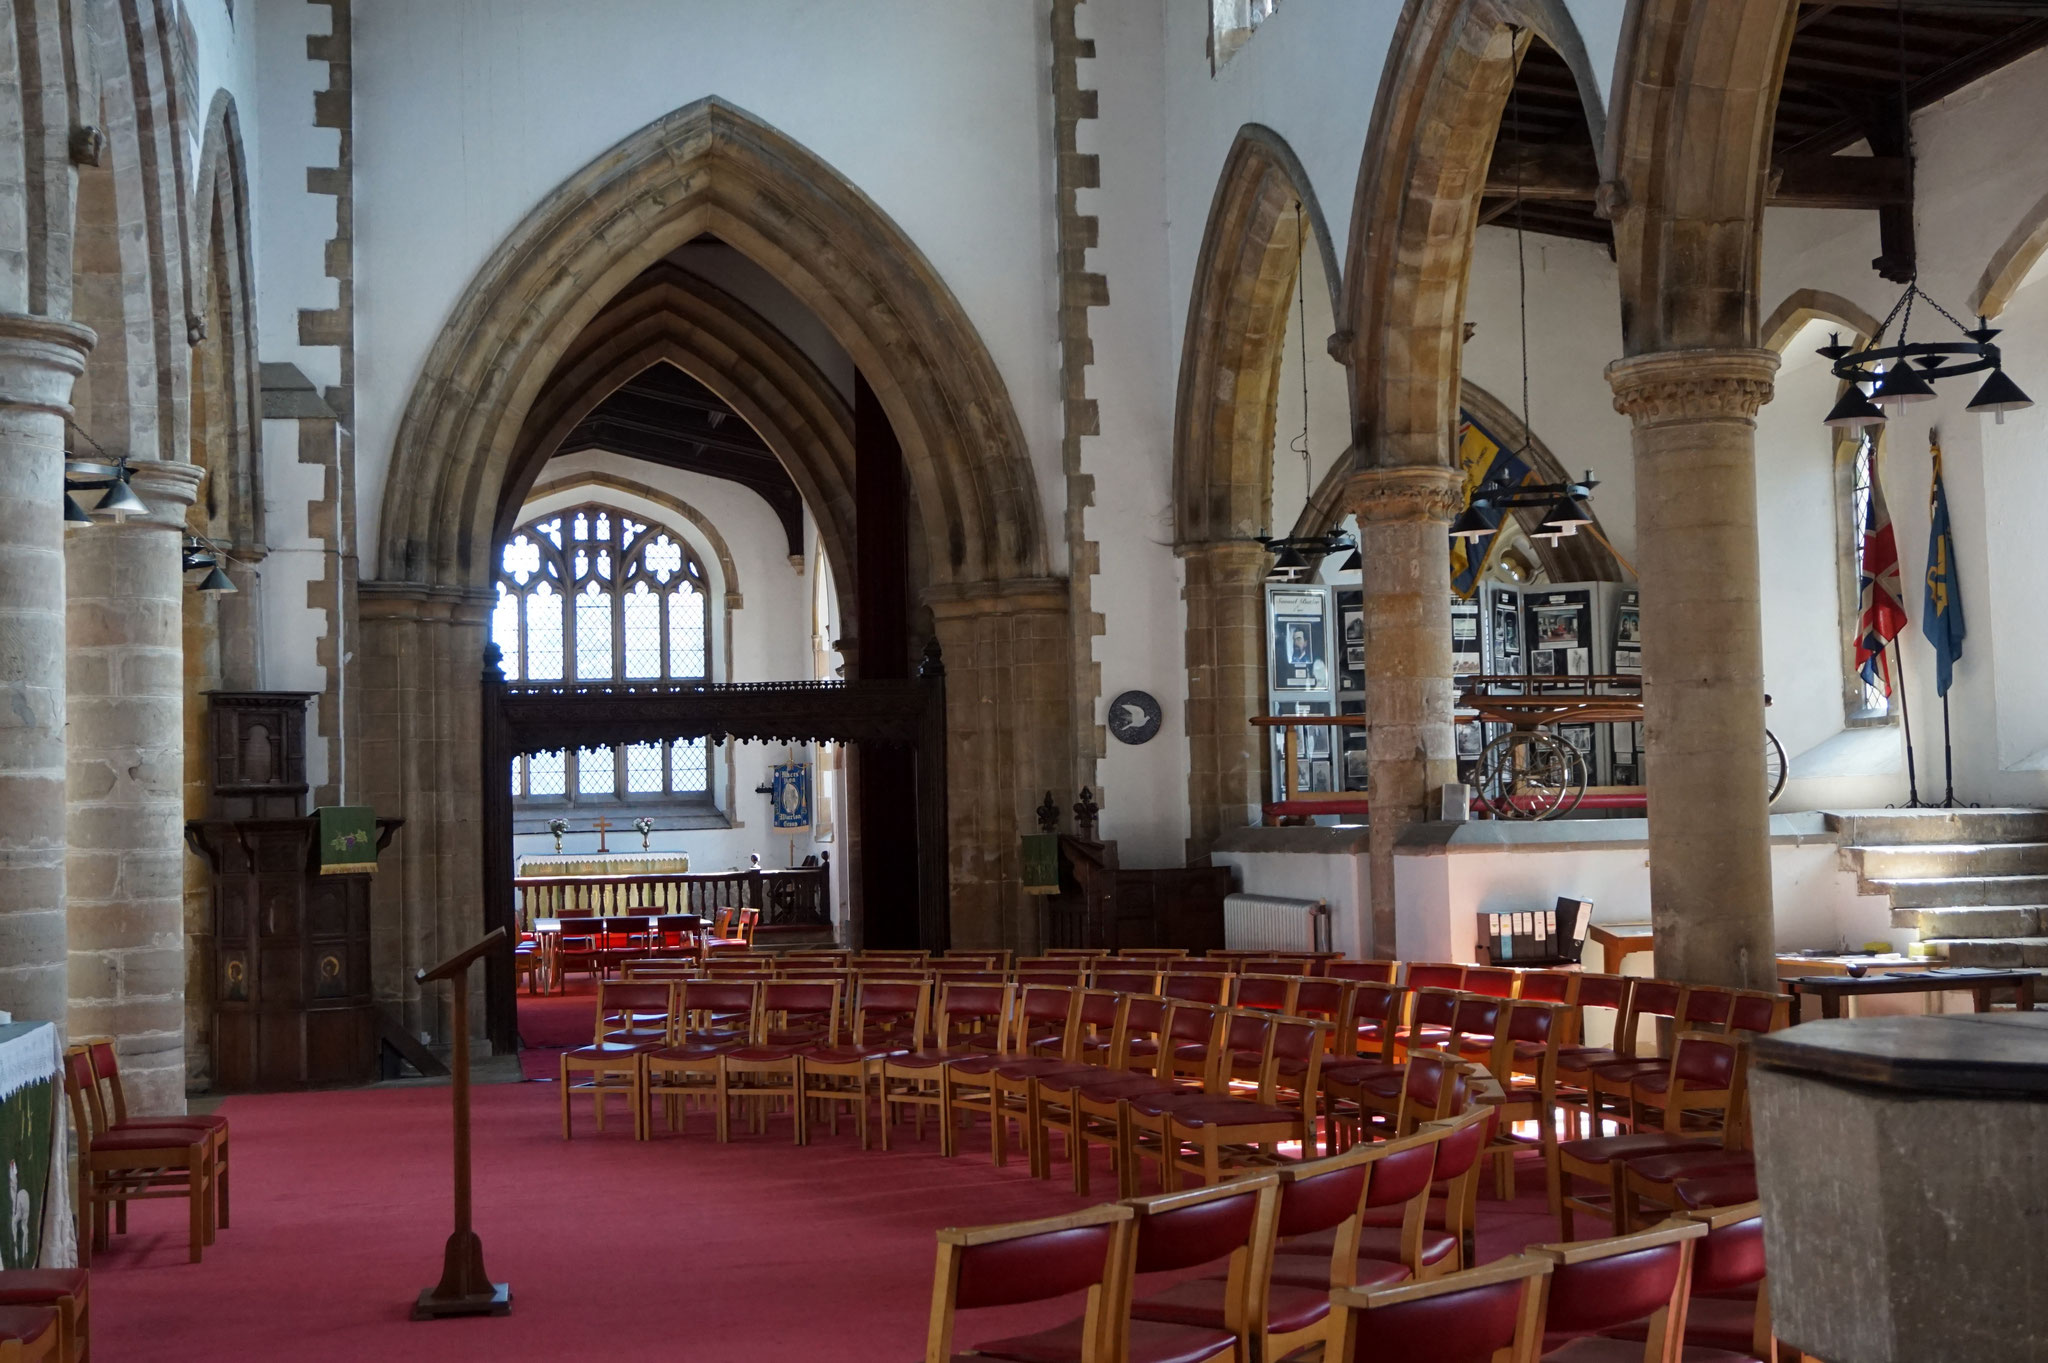 Looking from the nave to the tower and chancel arches